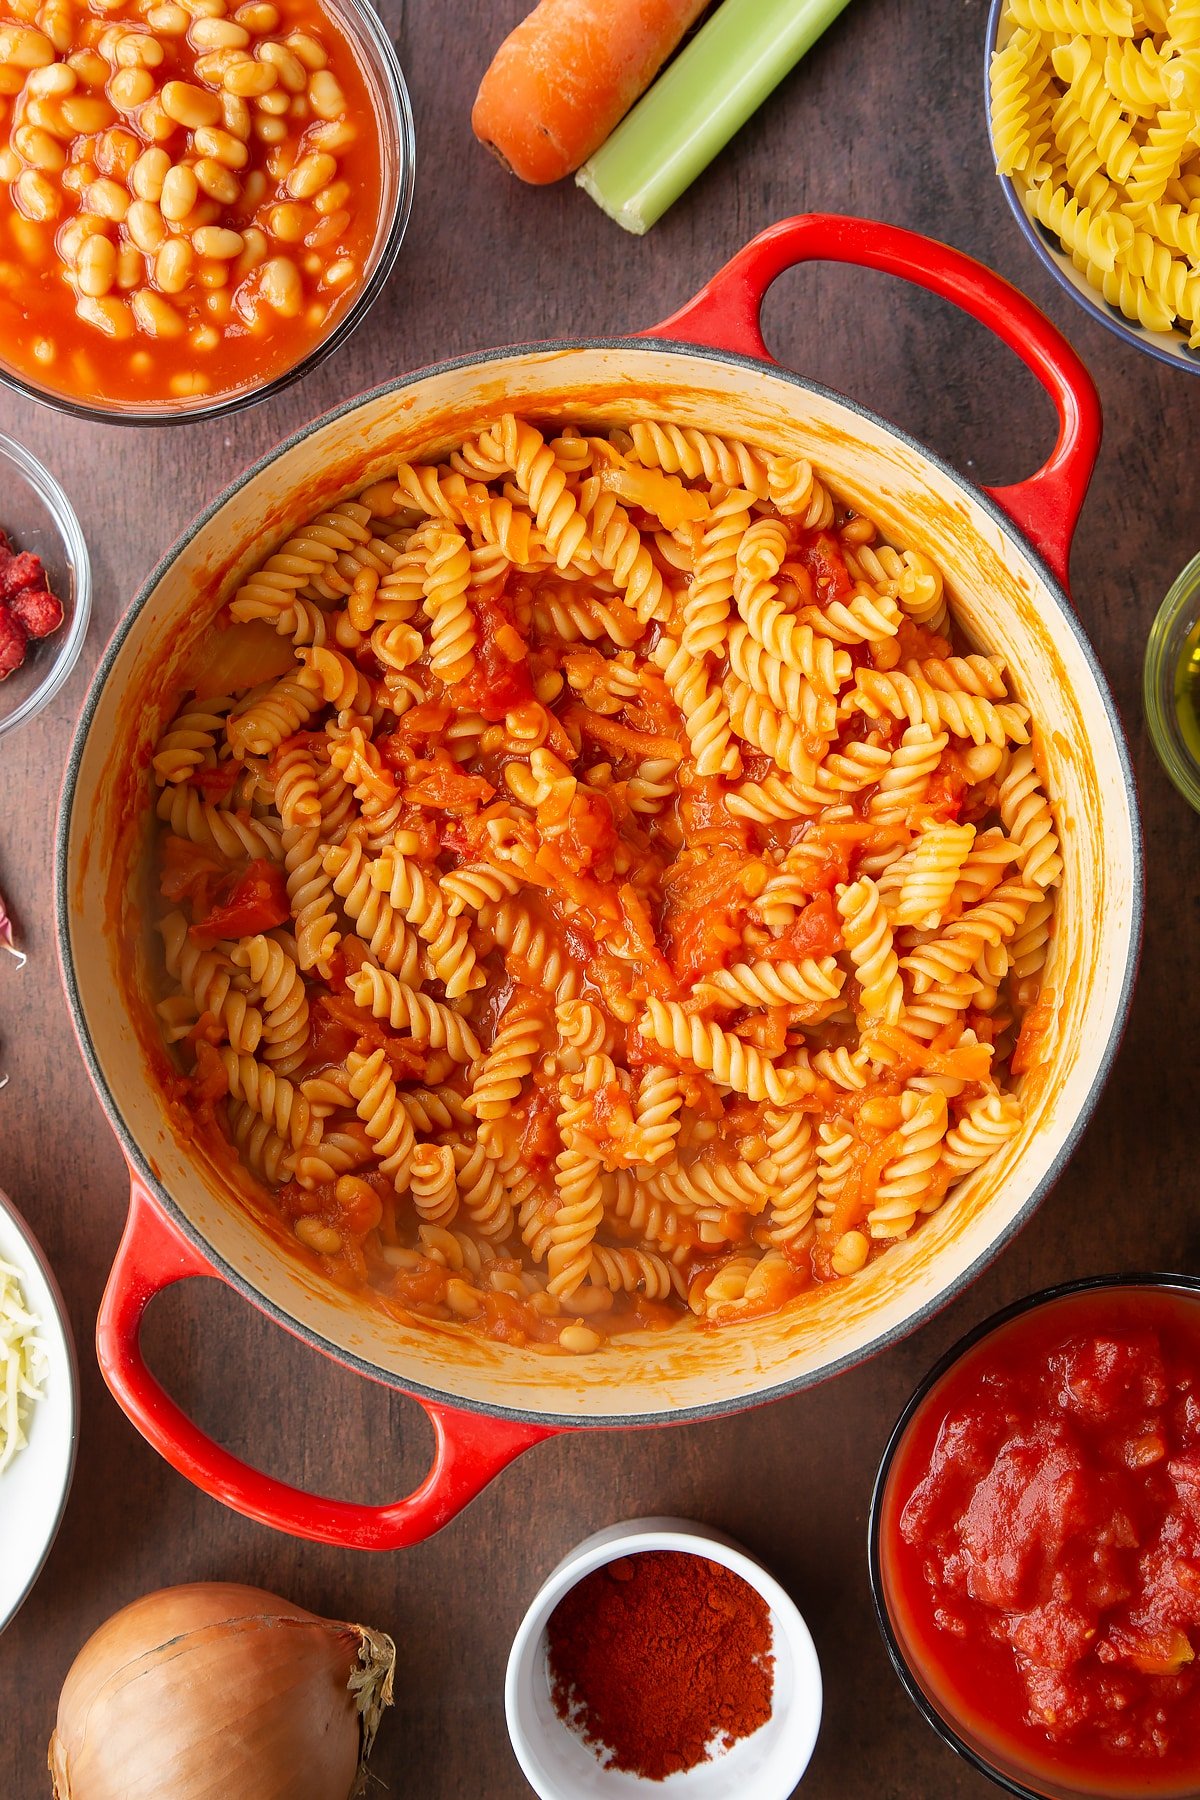 Baked beans and pasta in a saucepan. Ingredients to make pasta and baked beans surround the pan.